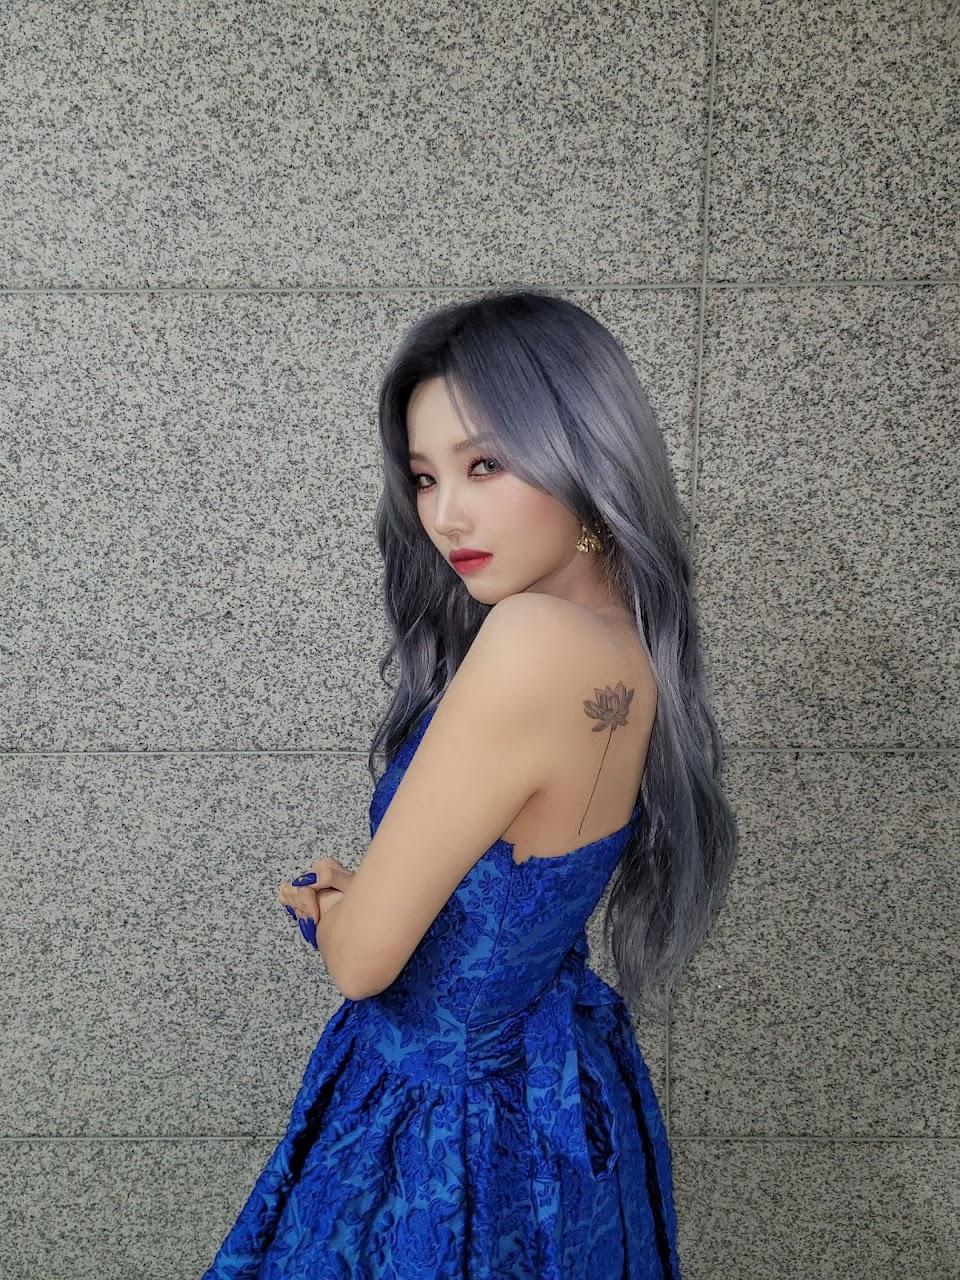 Soyeon ((G)I-DLE)
Soyeon has a lotus flower tattooed on her shoulder blade. The singer was super nervous to get this inked but surprisingly, it didn't hurt as much as she thought it would!